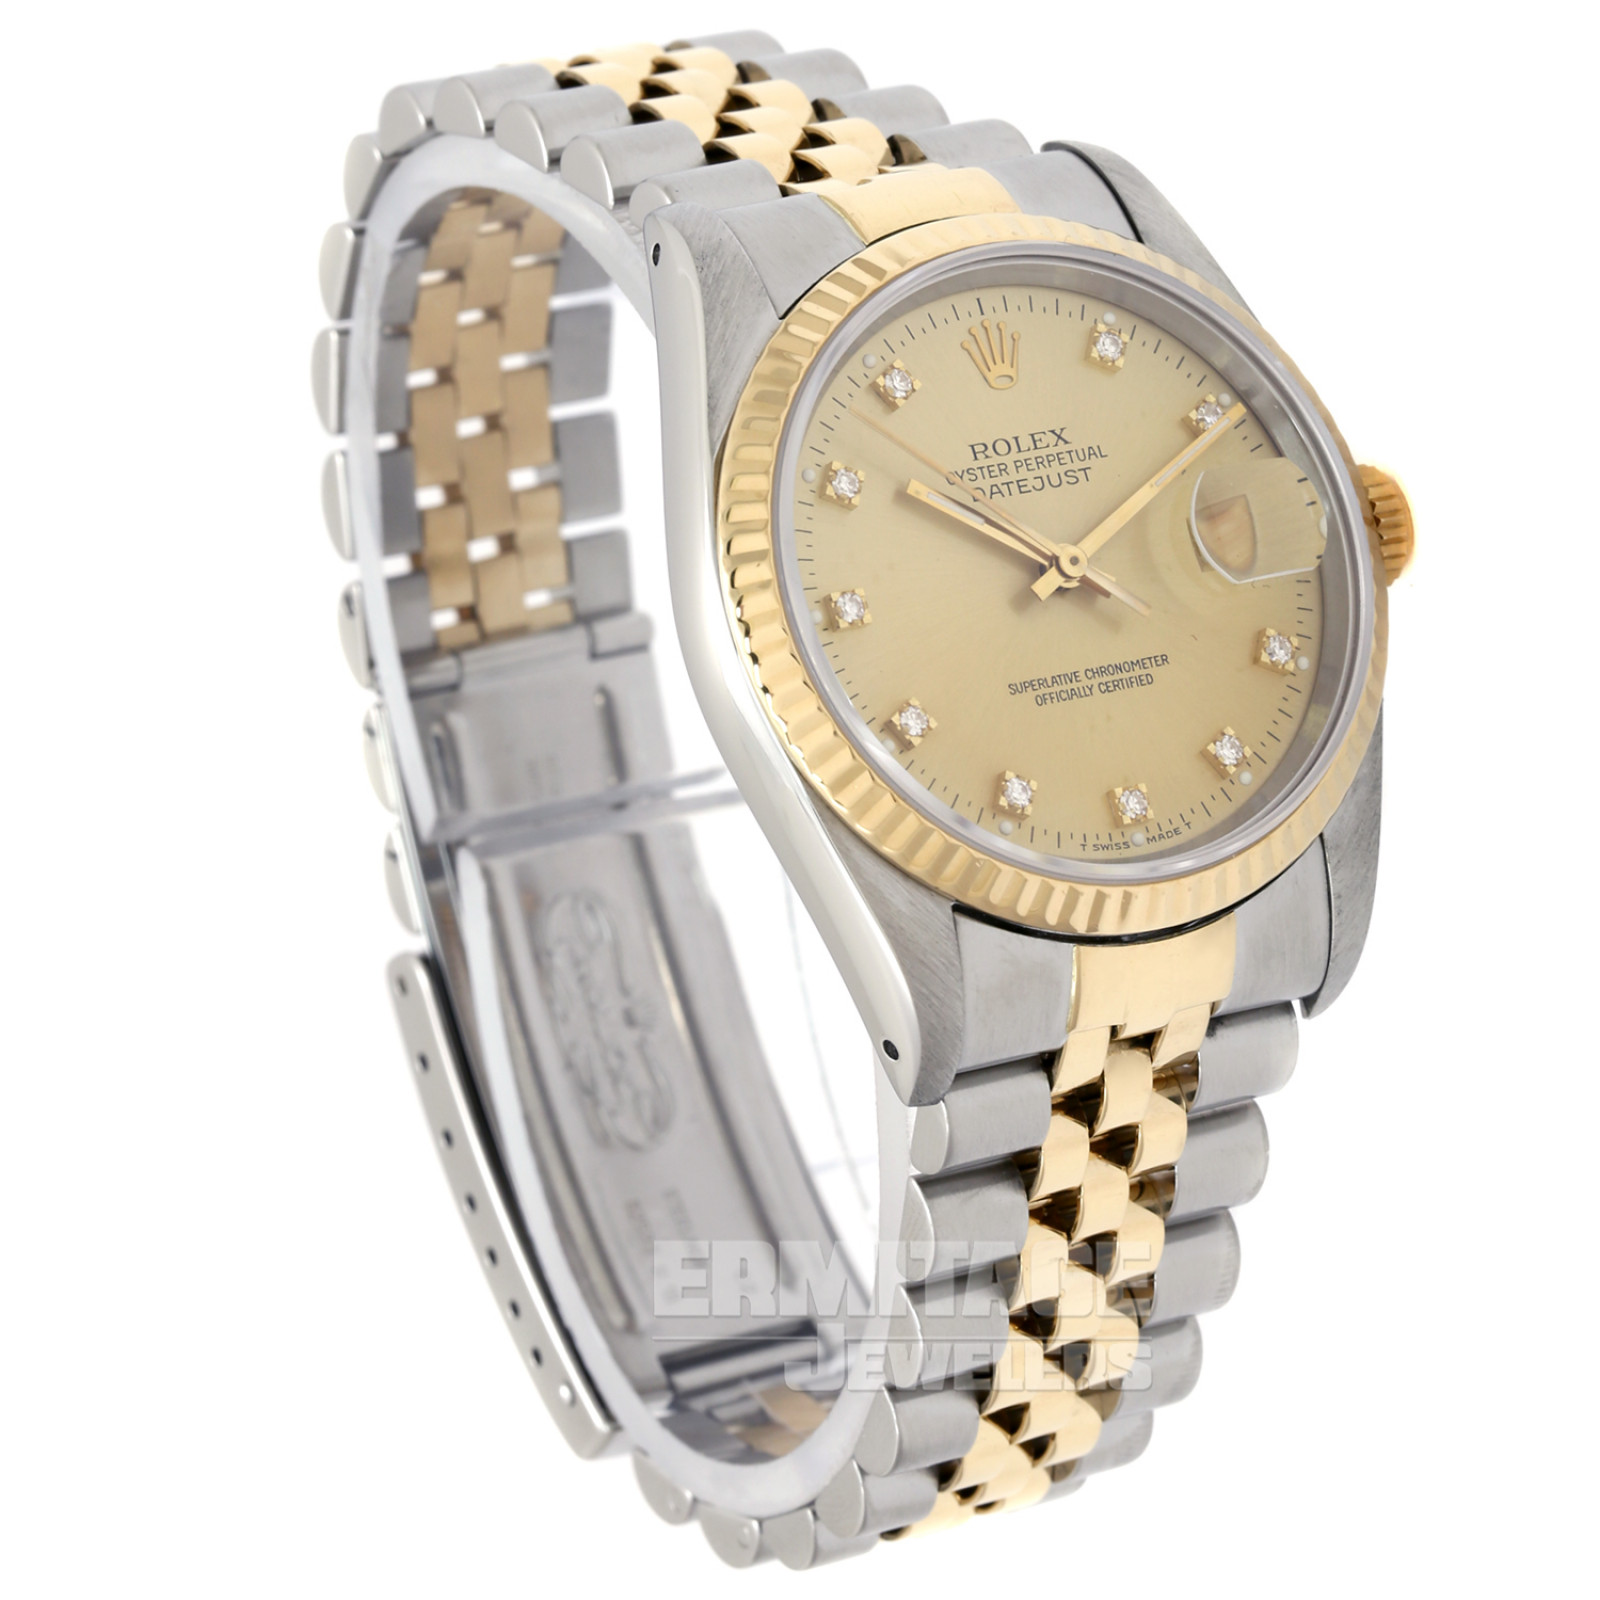 36 mm Rolex Datejust 16233 Gold & Steel on Oyster with Champagne Dial